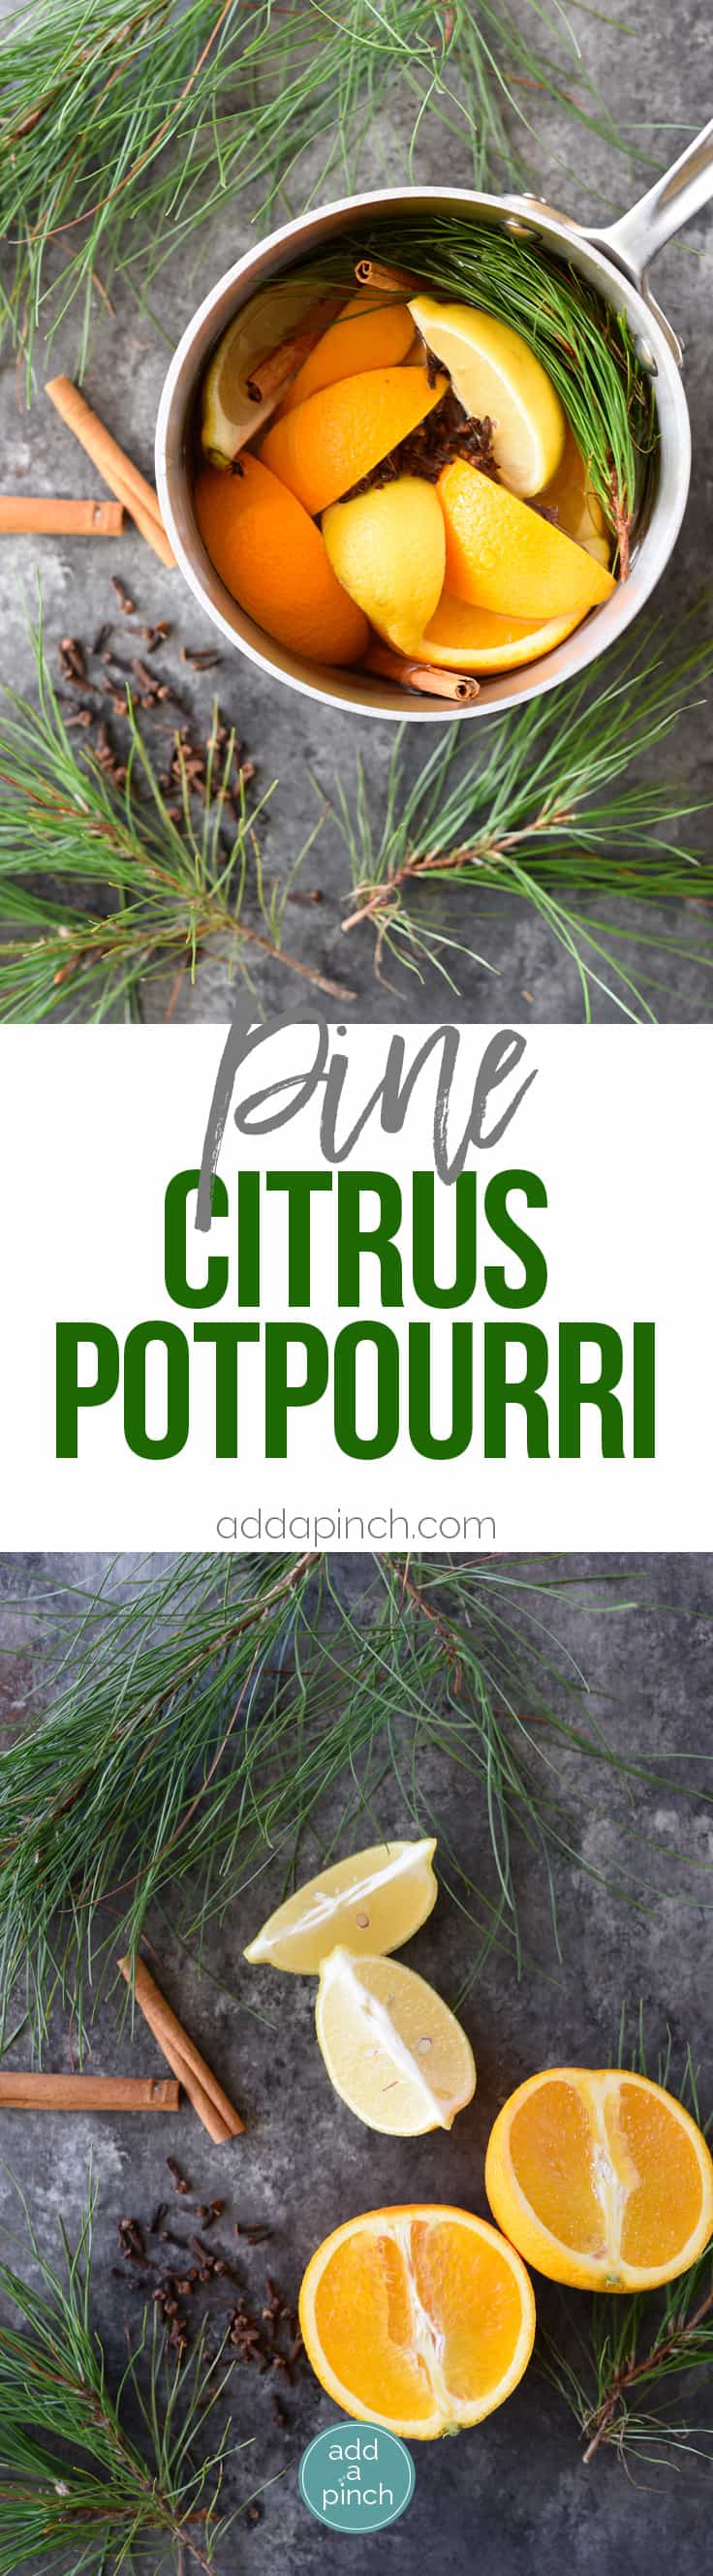 How to Make Potpourri - This all natural, quick and easy potpourri recipe makes your home smell amazing with fresh fruits, spices, and a touch of nature! // addapinch.com